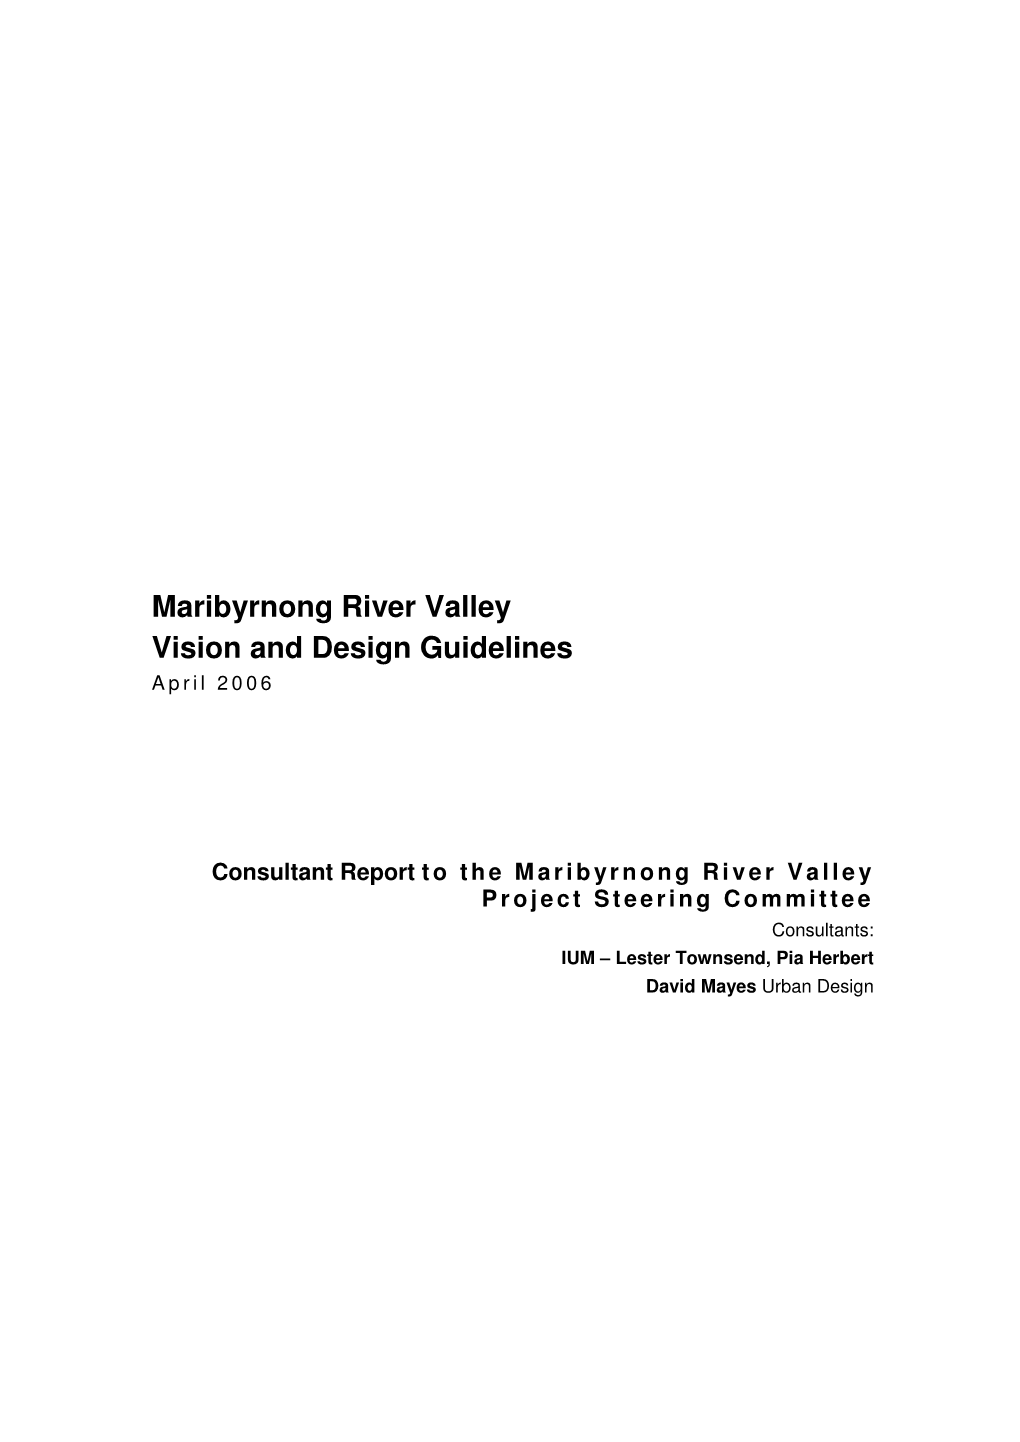 Maribyrnong River Valley Vision and Design Guidelines April 2006